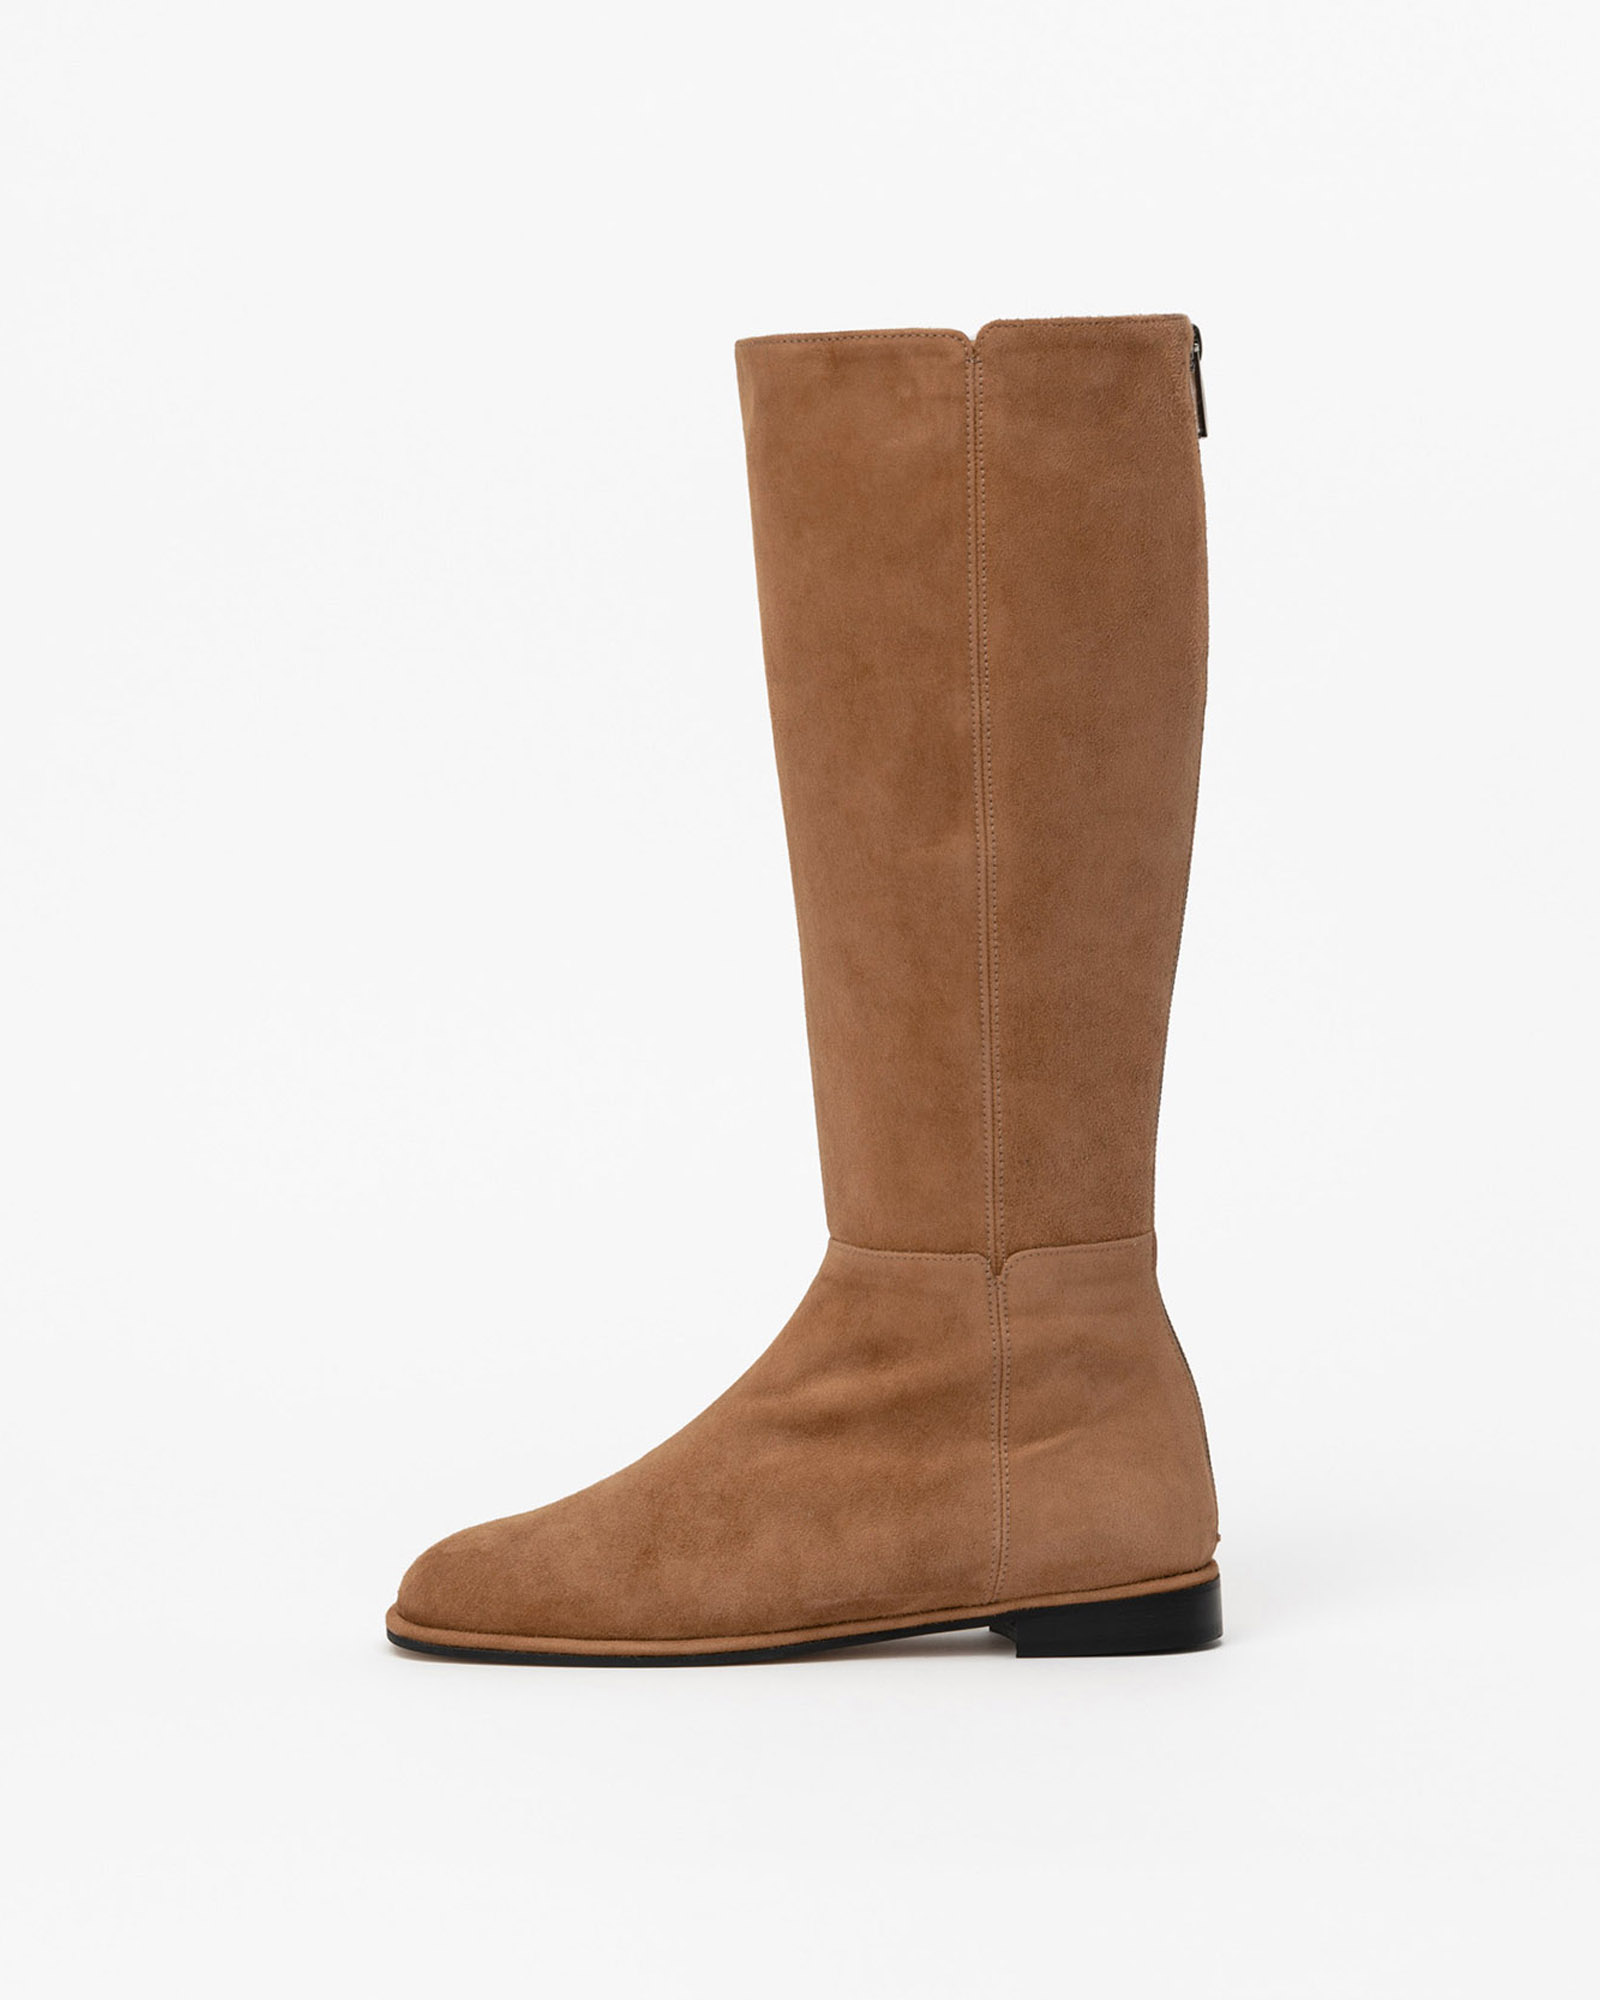 Buonissimo Boots in Brown Suede